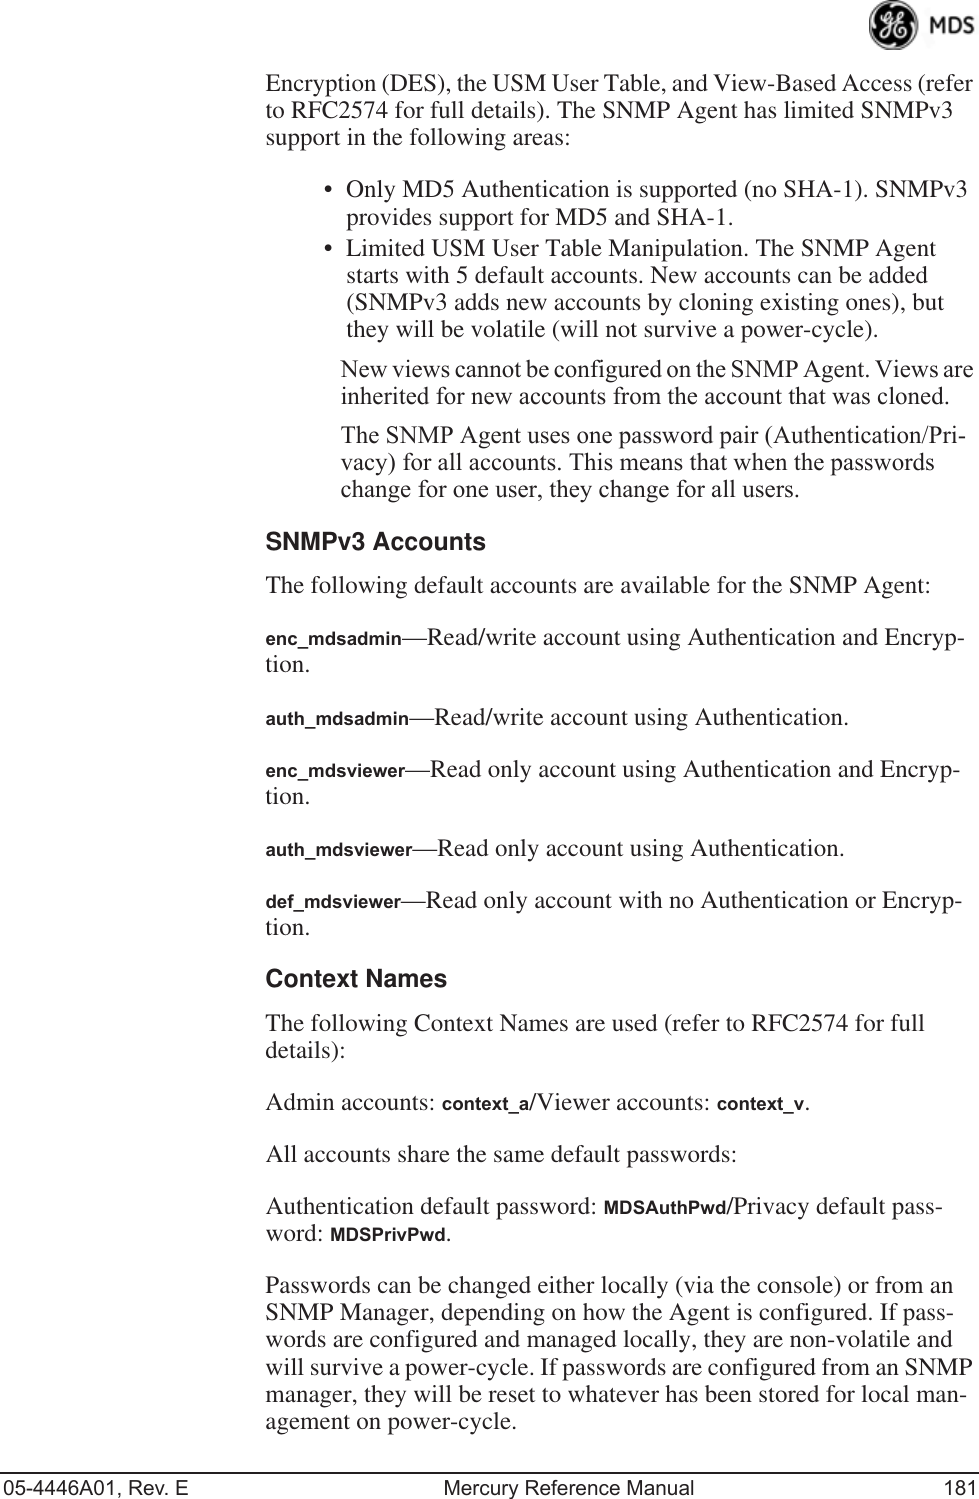 05-4446A01, Rev. E Mercury Reference Manual 181Encryption (DES), the USM User Table, and View-Based Access (refer to RFC2574 for full details). The SNMP Agent has limited SNMPv3 support in the following areas:• Only MD5 Authentication is supported (no SHA-1). SNMPv3 provides support for MD5 and SHA-1.• Limited USM User Table Manipulation. The SNMP Agent starts with 5 default accounts. New accounts can be added (SNMPv3 adds new accounts by cloning existing ones), but they will be volatile (will not survive a power-cycle). New views cannot be configured on the SNMP Agent. Views are inherited for new accounts from the account that was cloned.The SNMP Agent uses one password pair (Authentication/Pri-vacy) for all accounts. This means that when the passwords change for one user, they change for all users.SNMPv3 AccountsThe following default accounts are available for the SNMP Agent:enc_mdsadmin—Read/write account using Authentication and Encryp-tion.auth_mdsadmin—Read/write account using Authentication.enc_mdsviewer—Read only account using Authentication and Encryp-tion.auth_mdsviewer—Read only account using Authentication.def_mdsviewer—Read only account with no Authentication or Encryp-tion.Context NamesThe following Context Names are used (refer to RFC2574 for full details):Admin accounts: context_a/Viewer accounts: context_v.All accounts share the same default passwords:Authentication default password: MDSAuthPwd/Privacy default pass-word: MDSPrivPwd.Passwords can be changed either locally (via the console) or from an SNMP Manager, depending on how the Agent is configured. If pass-words are configured and managed locally, they are non-volatile and will survive a power-cycle. If passwords are configured from an SNMP manager, they will be reset to whatever has been stored for local man-agement on power-cycle.